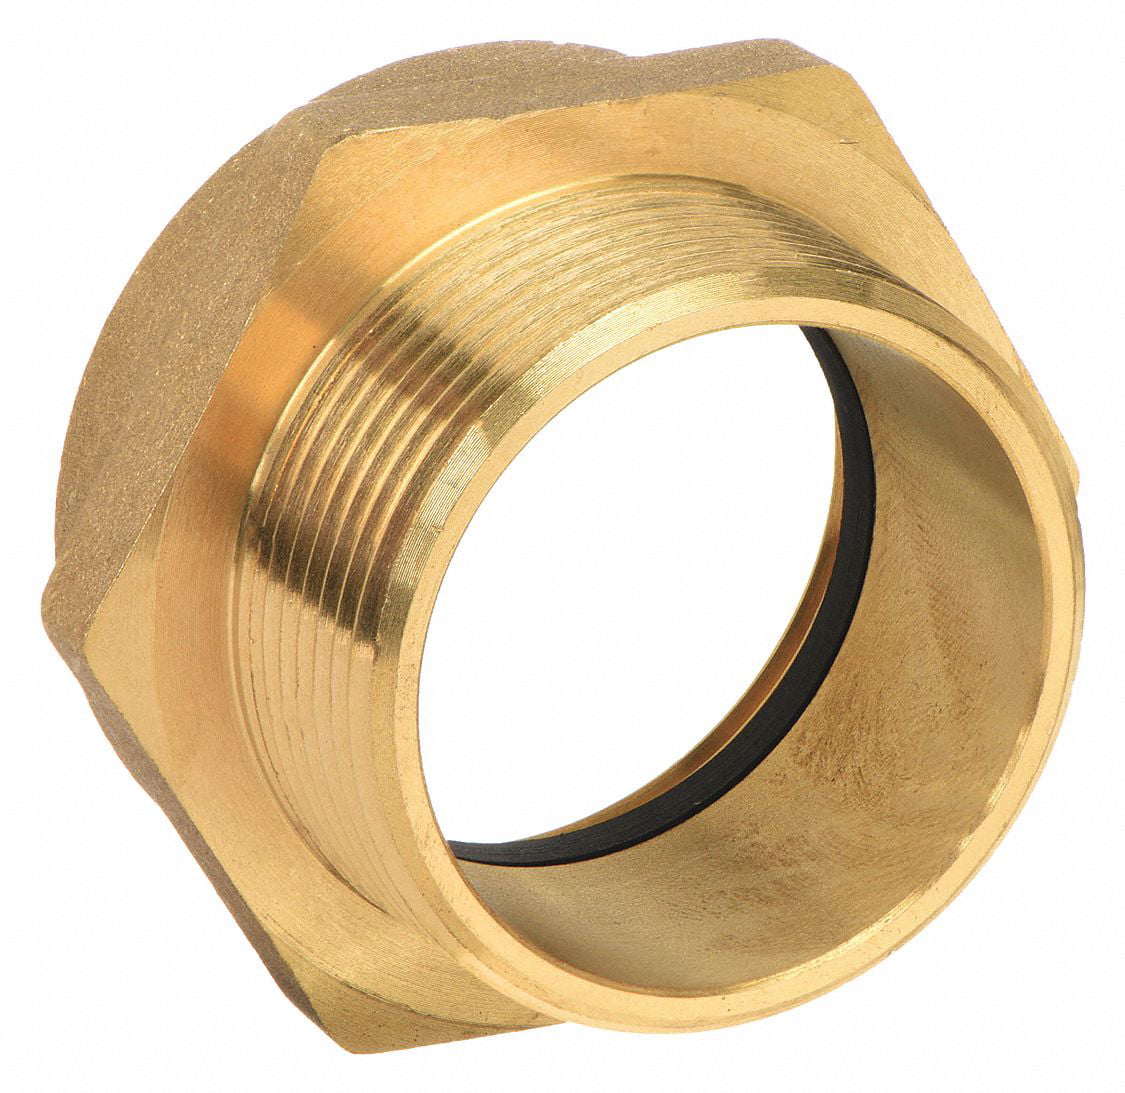 Hex Fire Hose Adapter Fitting Size 1 x 1-1/2 Pack of 5 Fitting Material Brass x Brass